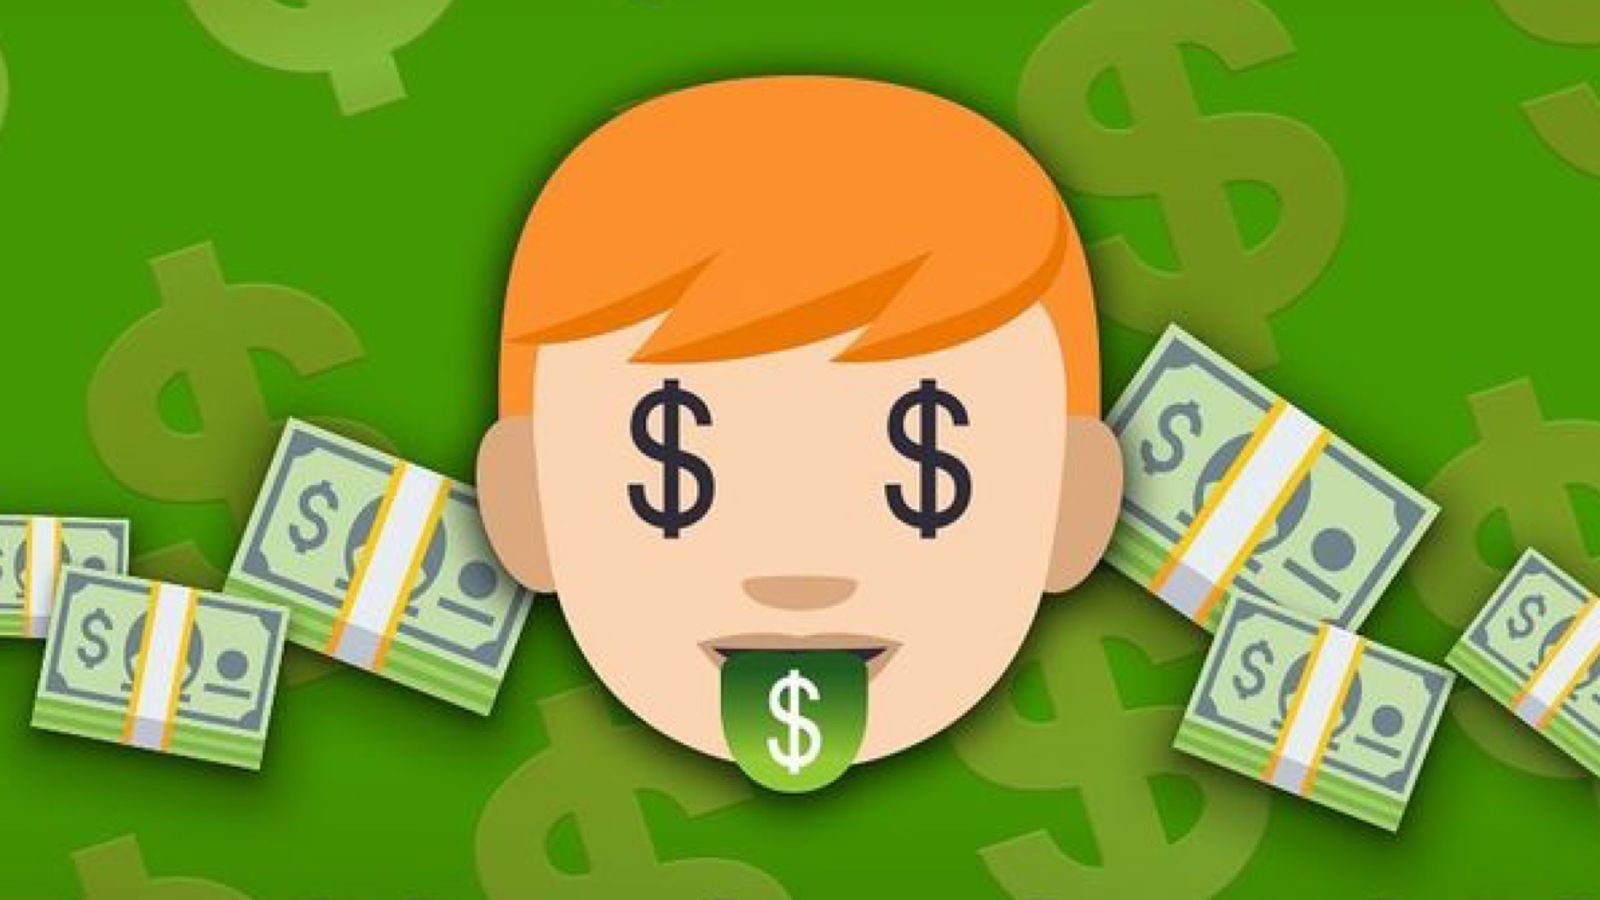 A blonde-haired man with dollar signs for eyes surrounded by cash on a green background.